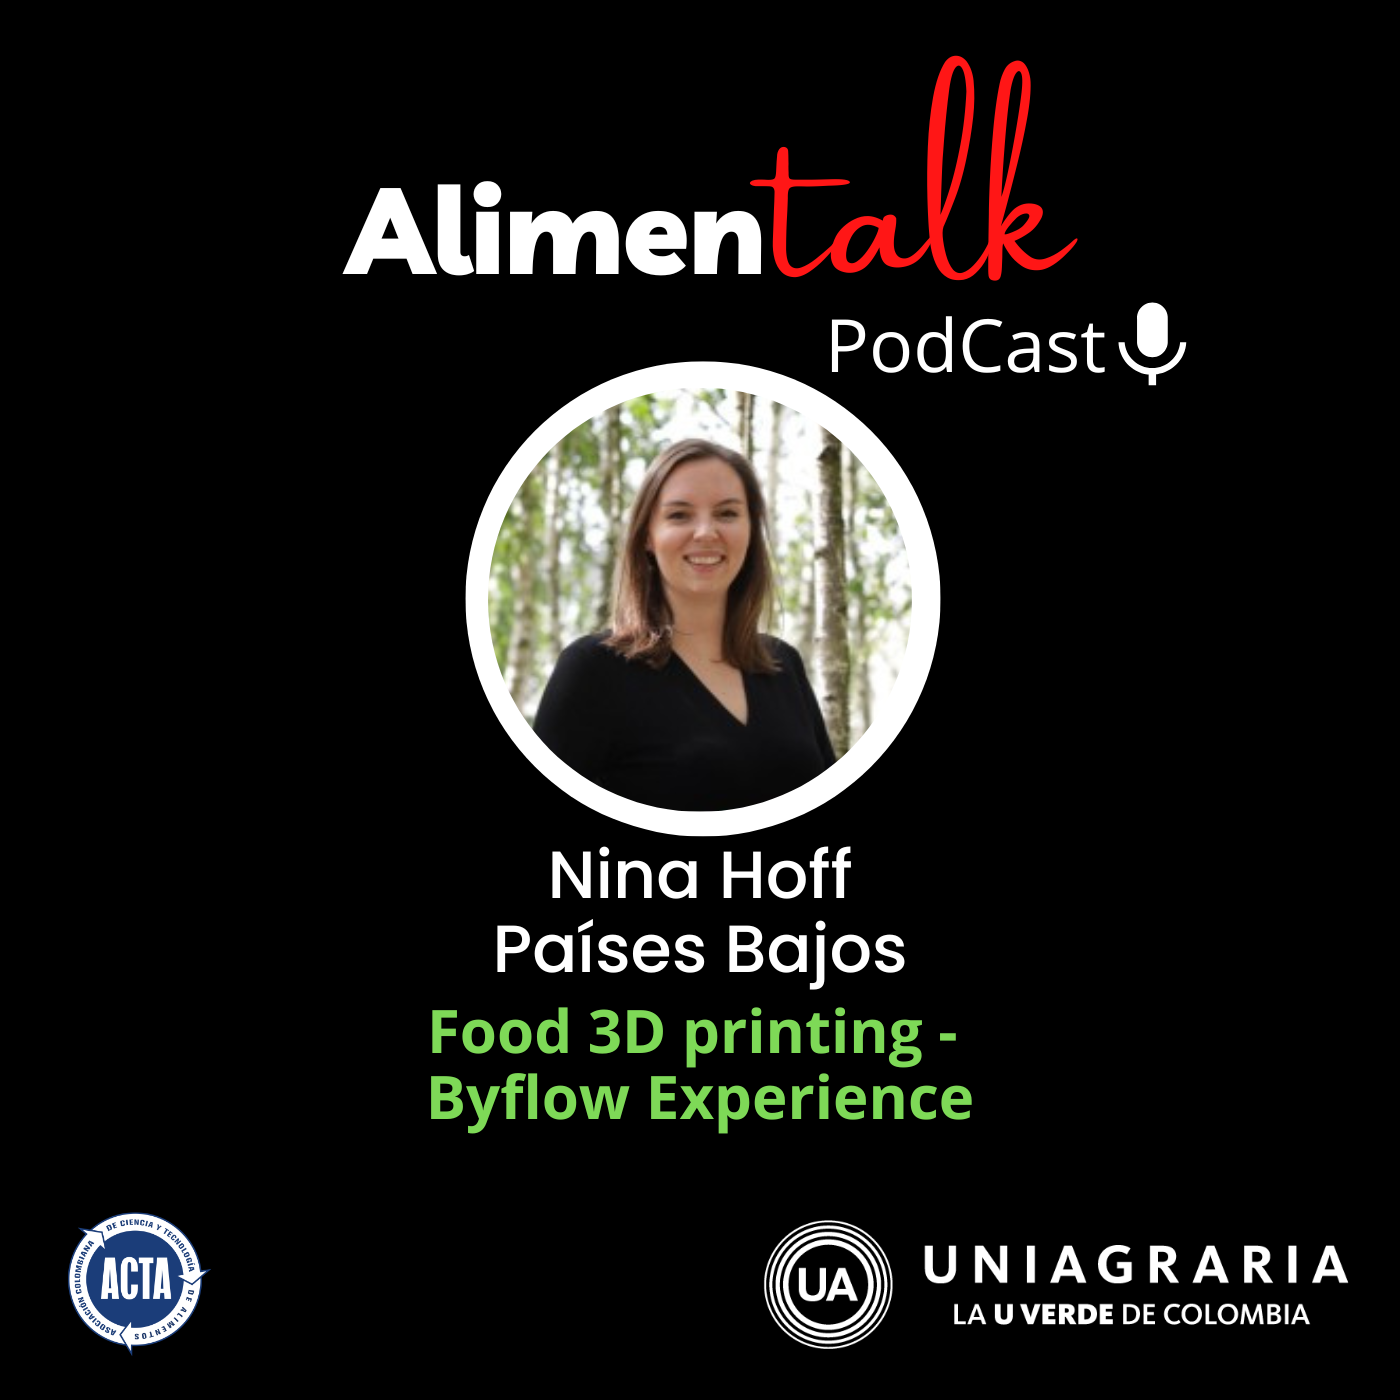 AlimenTalk podCast: Food 3D printing – Byflow Experience